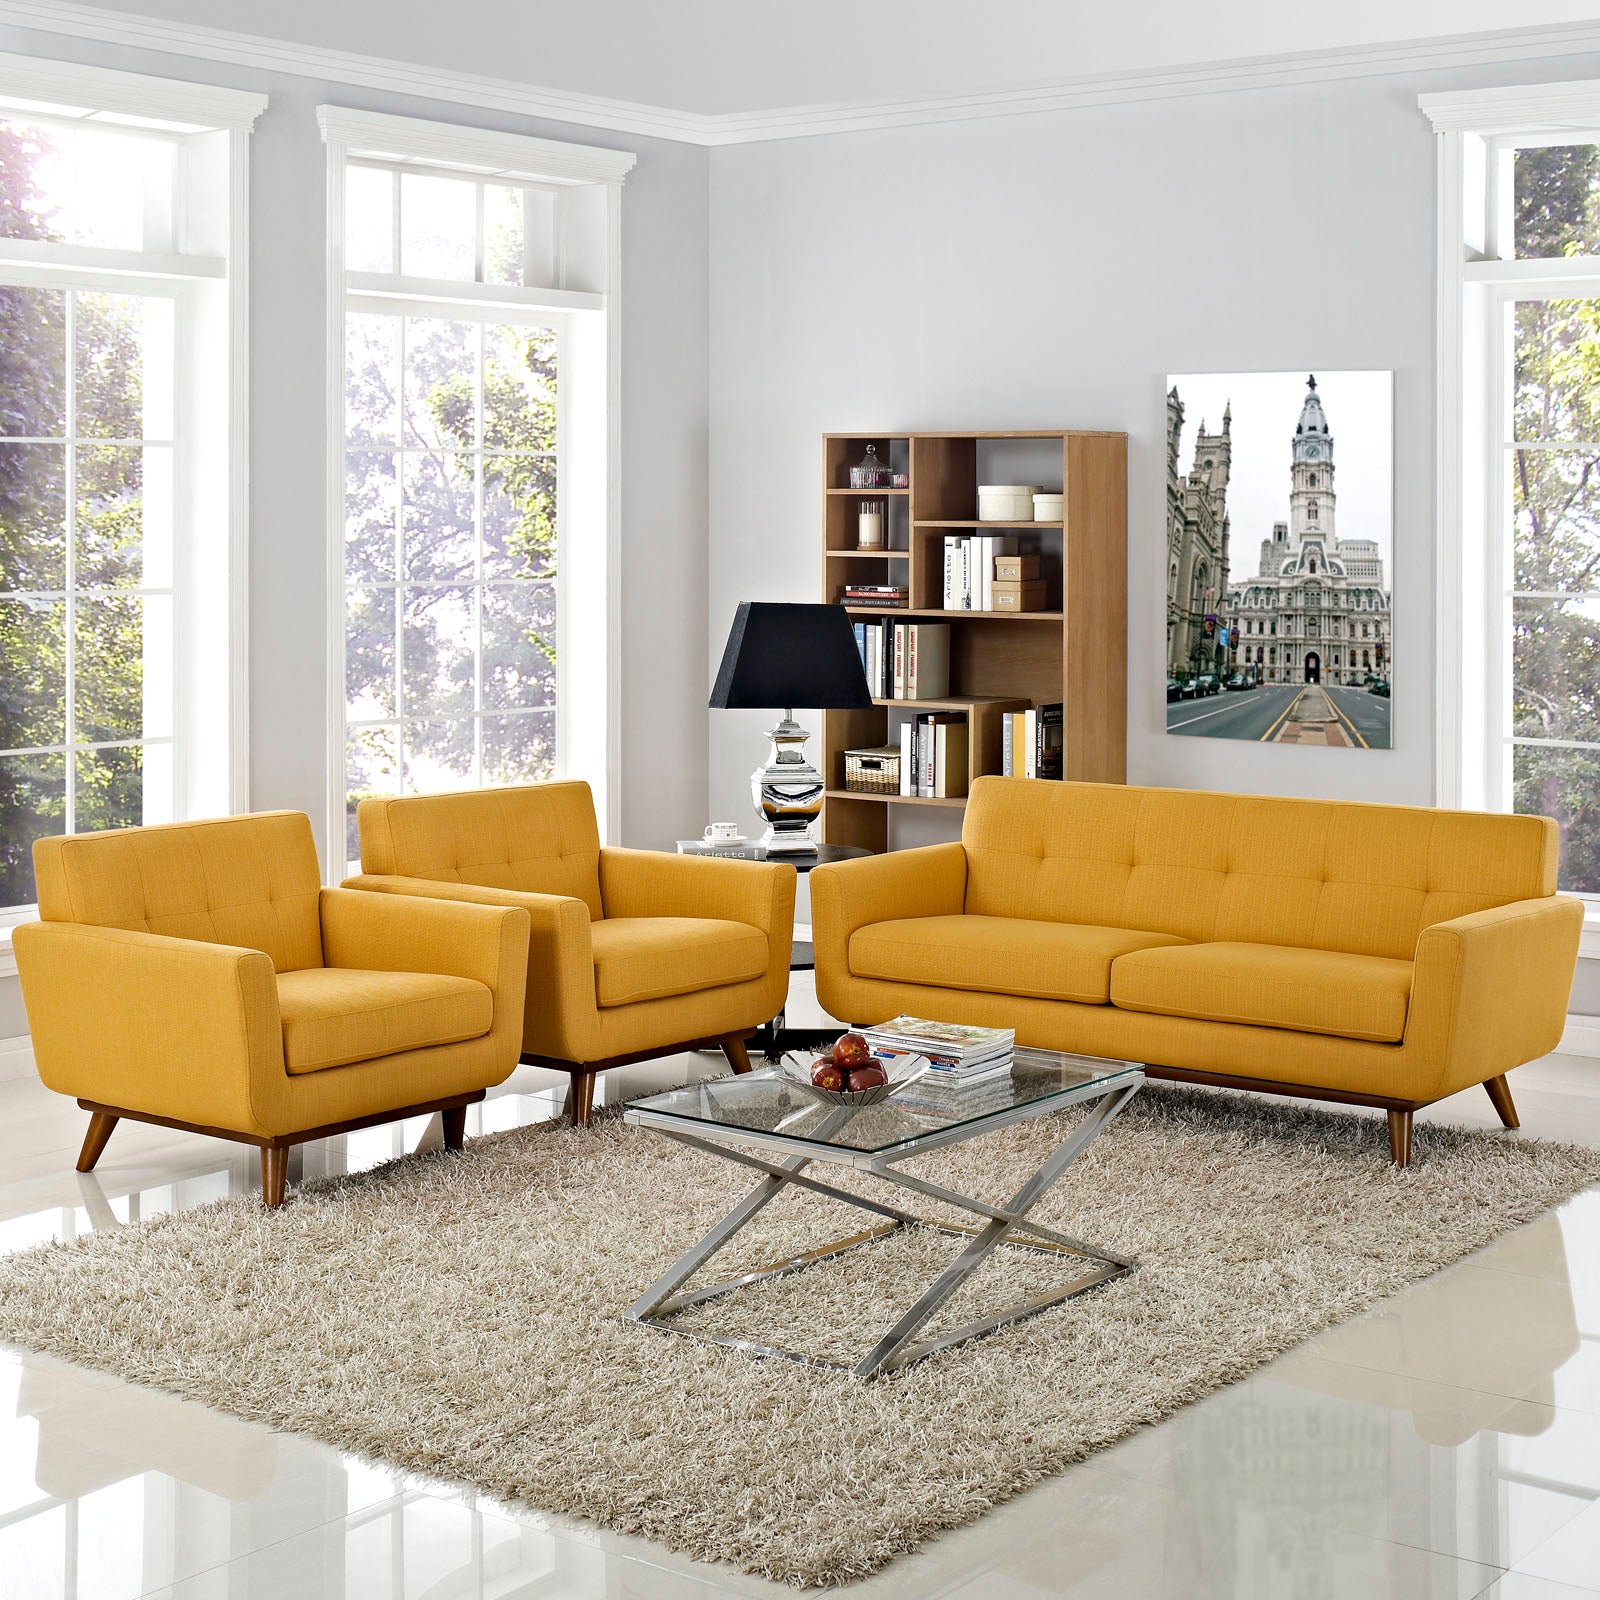 Engage Armchairs and Loveseat Set of 3 - East Shore Modern Home Furnishings